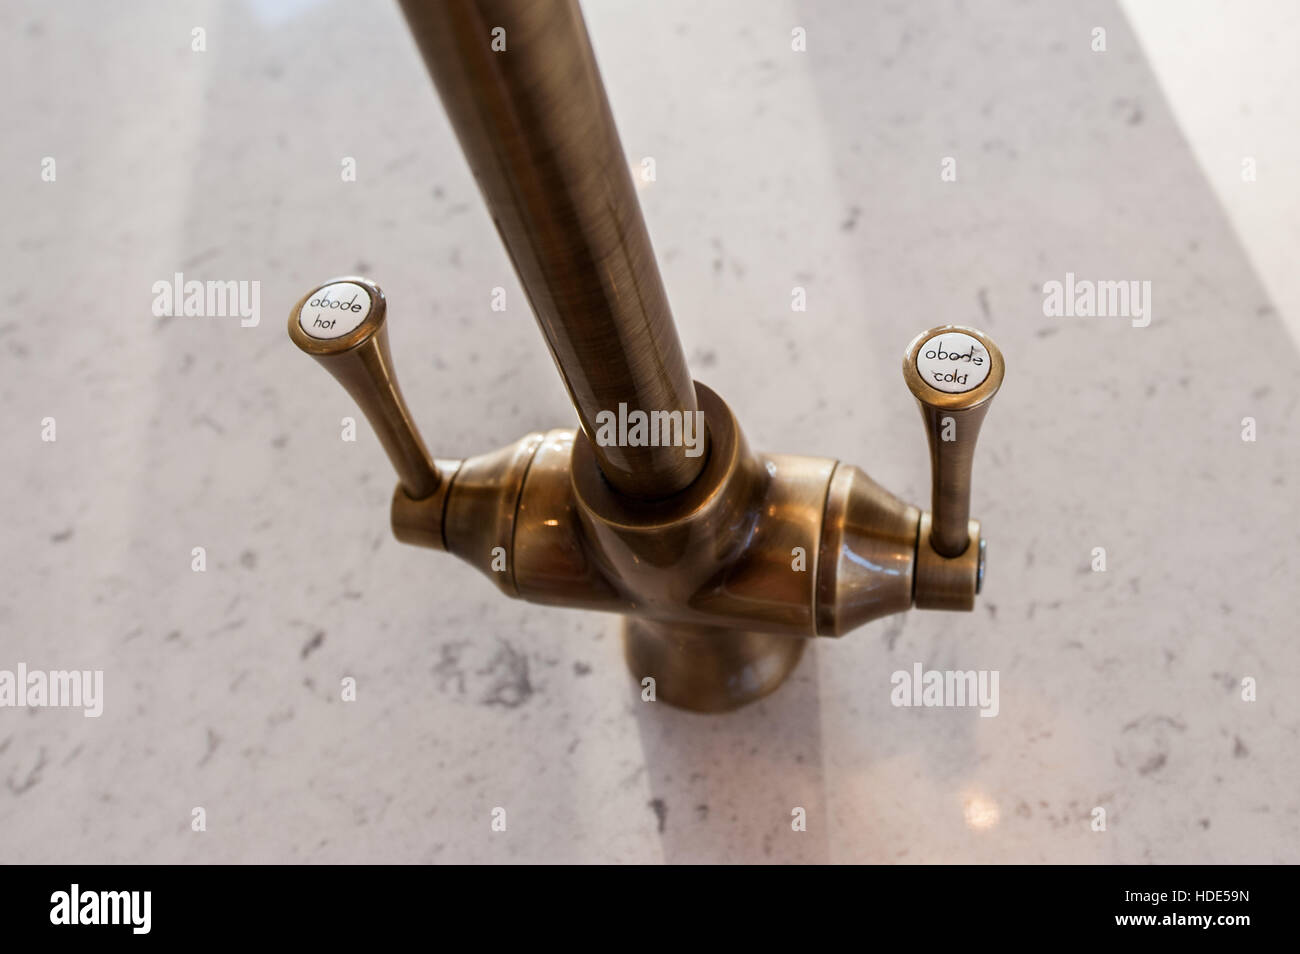 A brass coloured hot and cold mixer tap in a domestic kitchen. Stock Photo